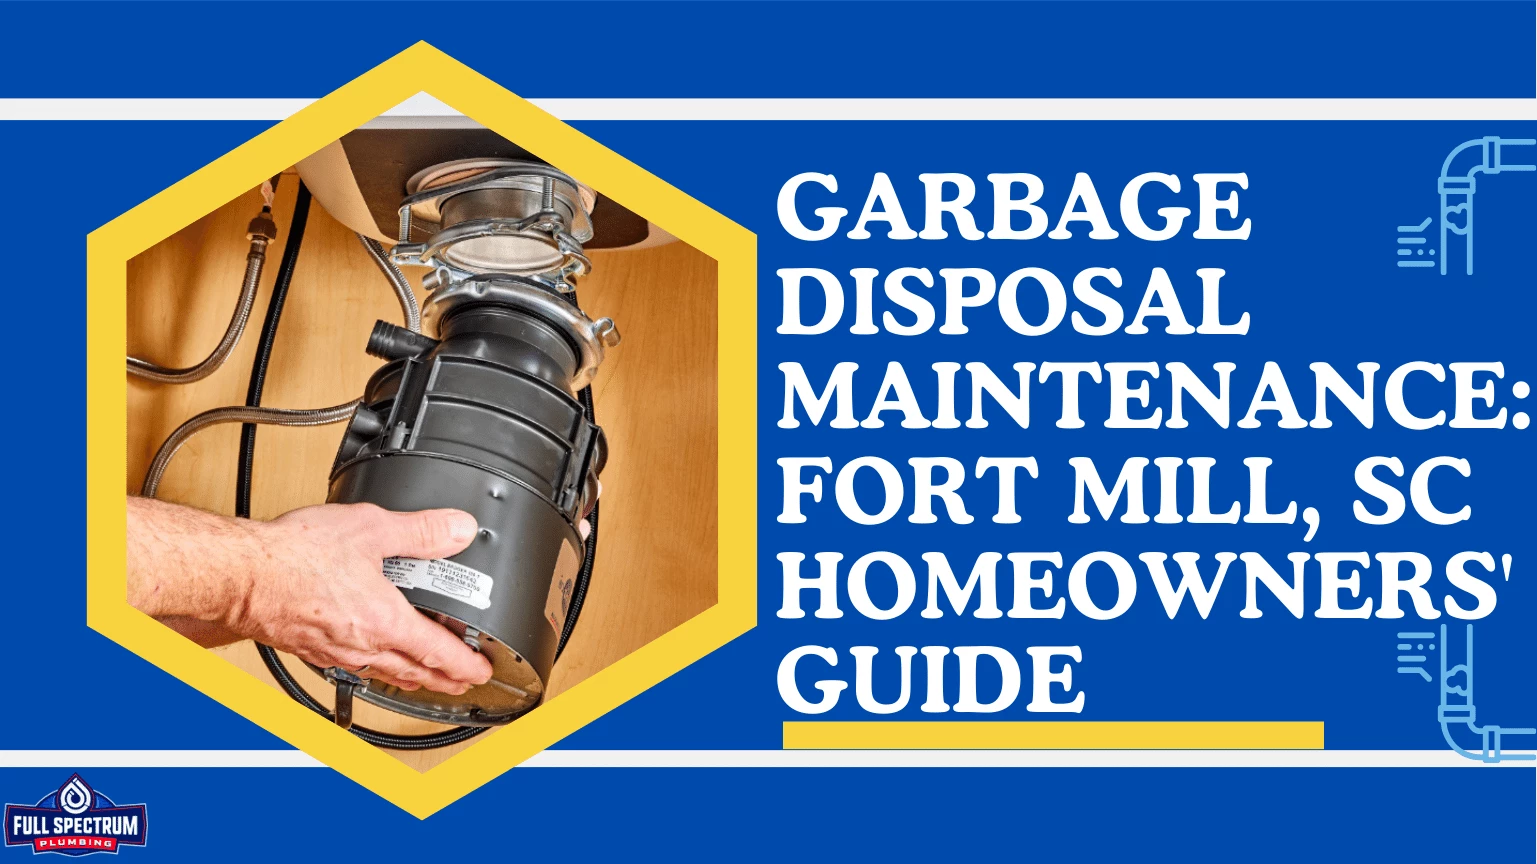 Garbage Disposal Maintenance Fort Mill, SC Homeowners' Guide